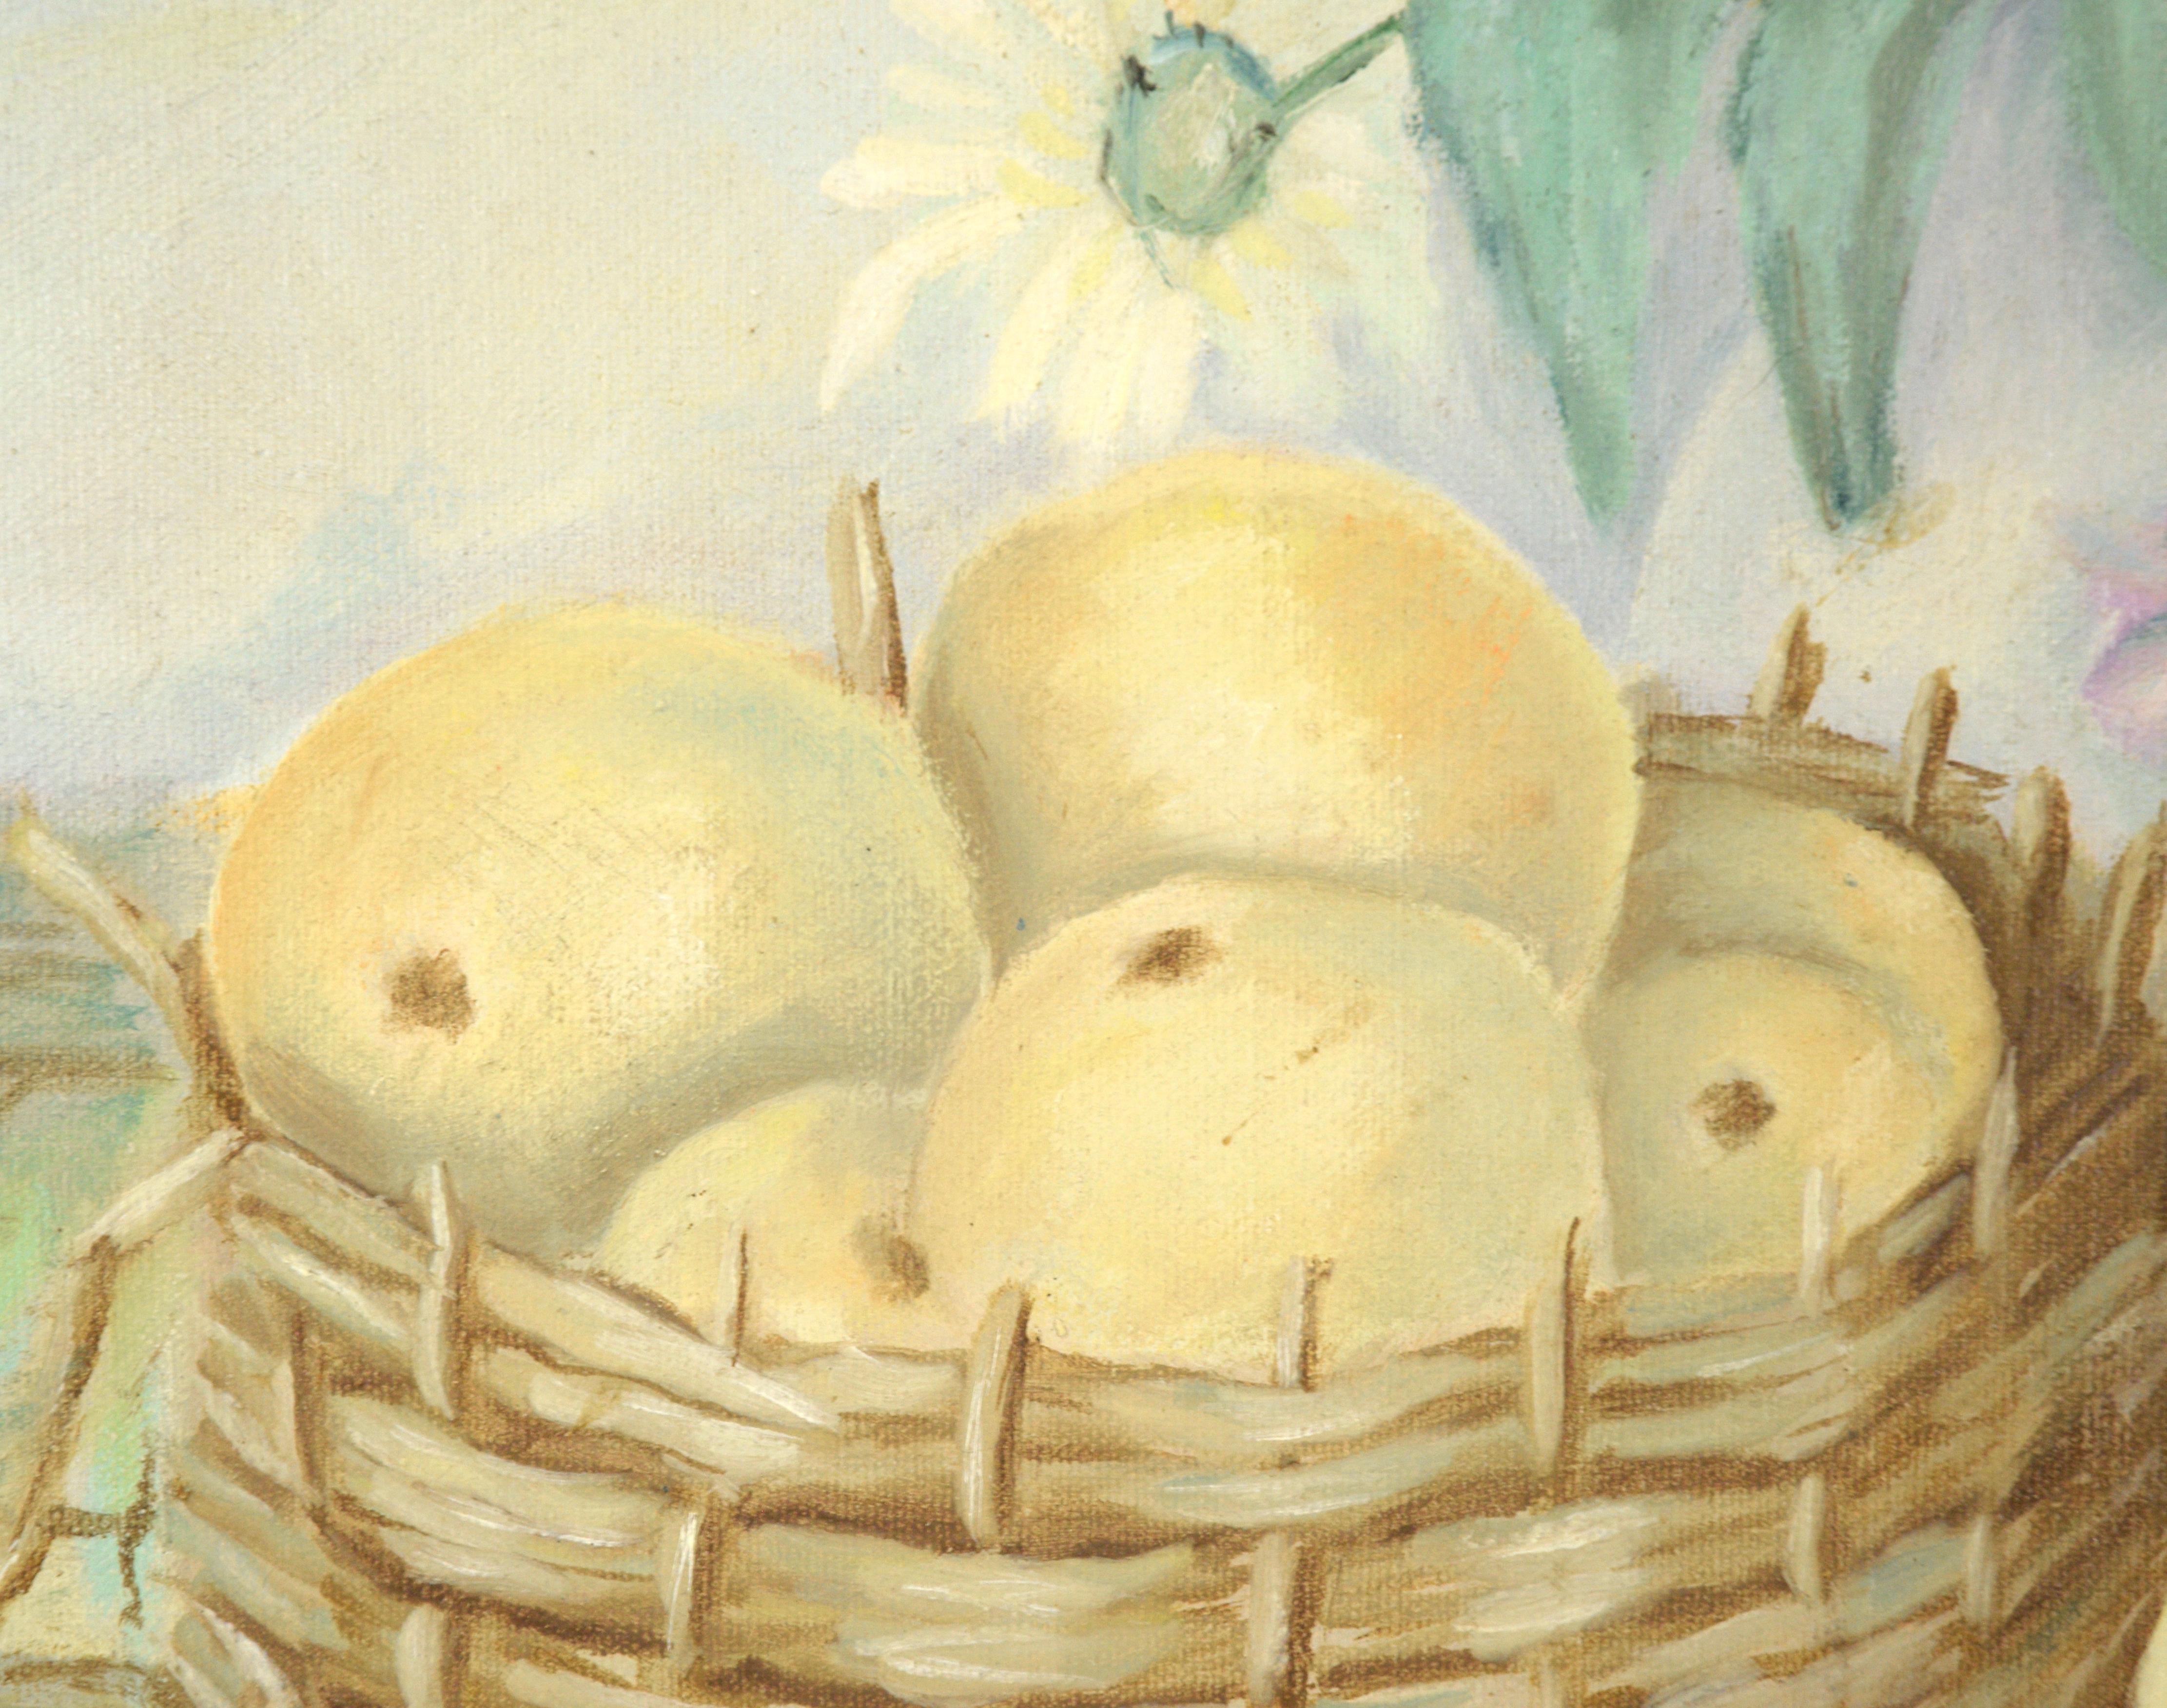 when was the basket of apples painted